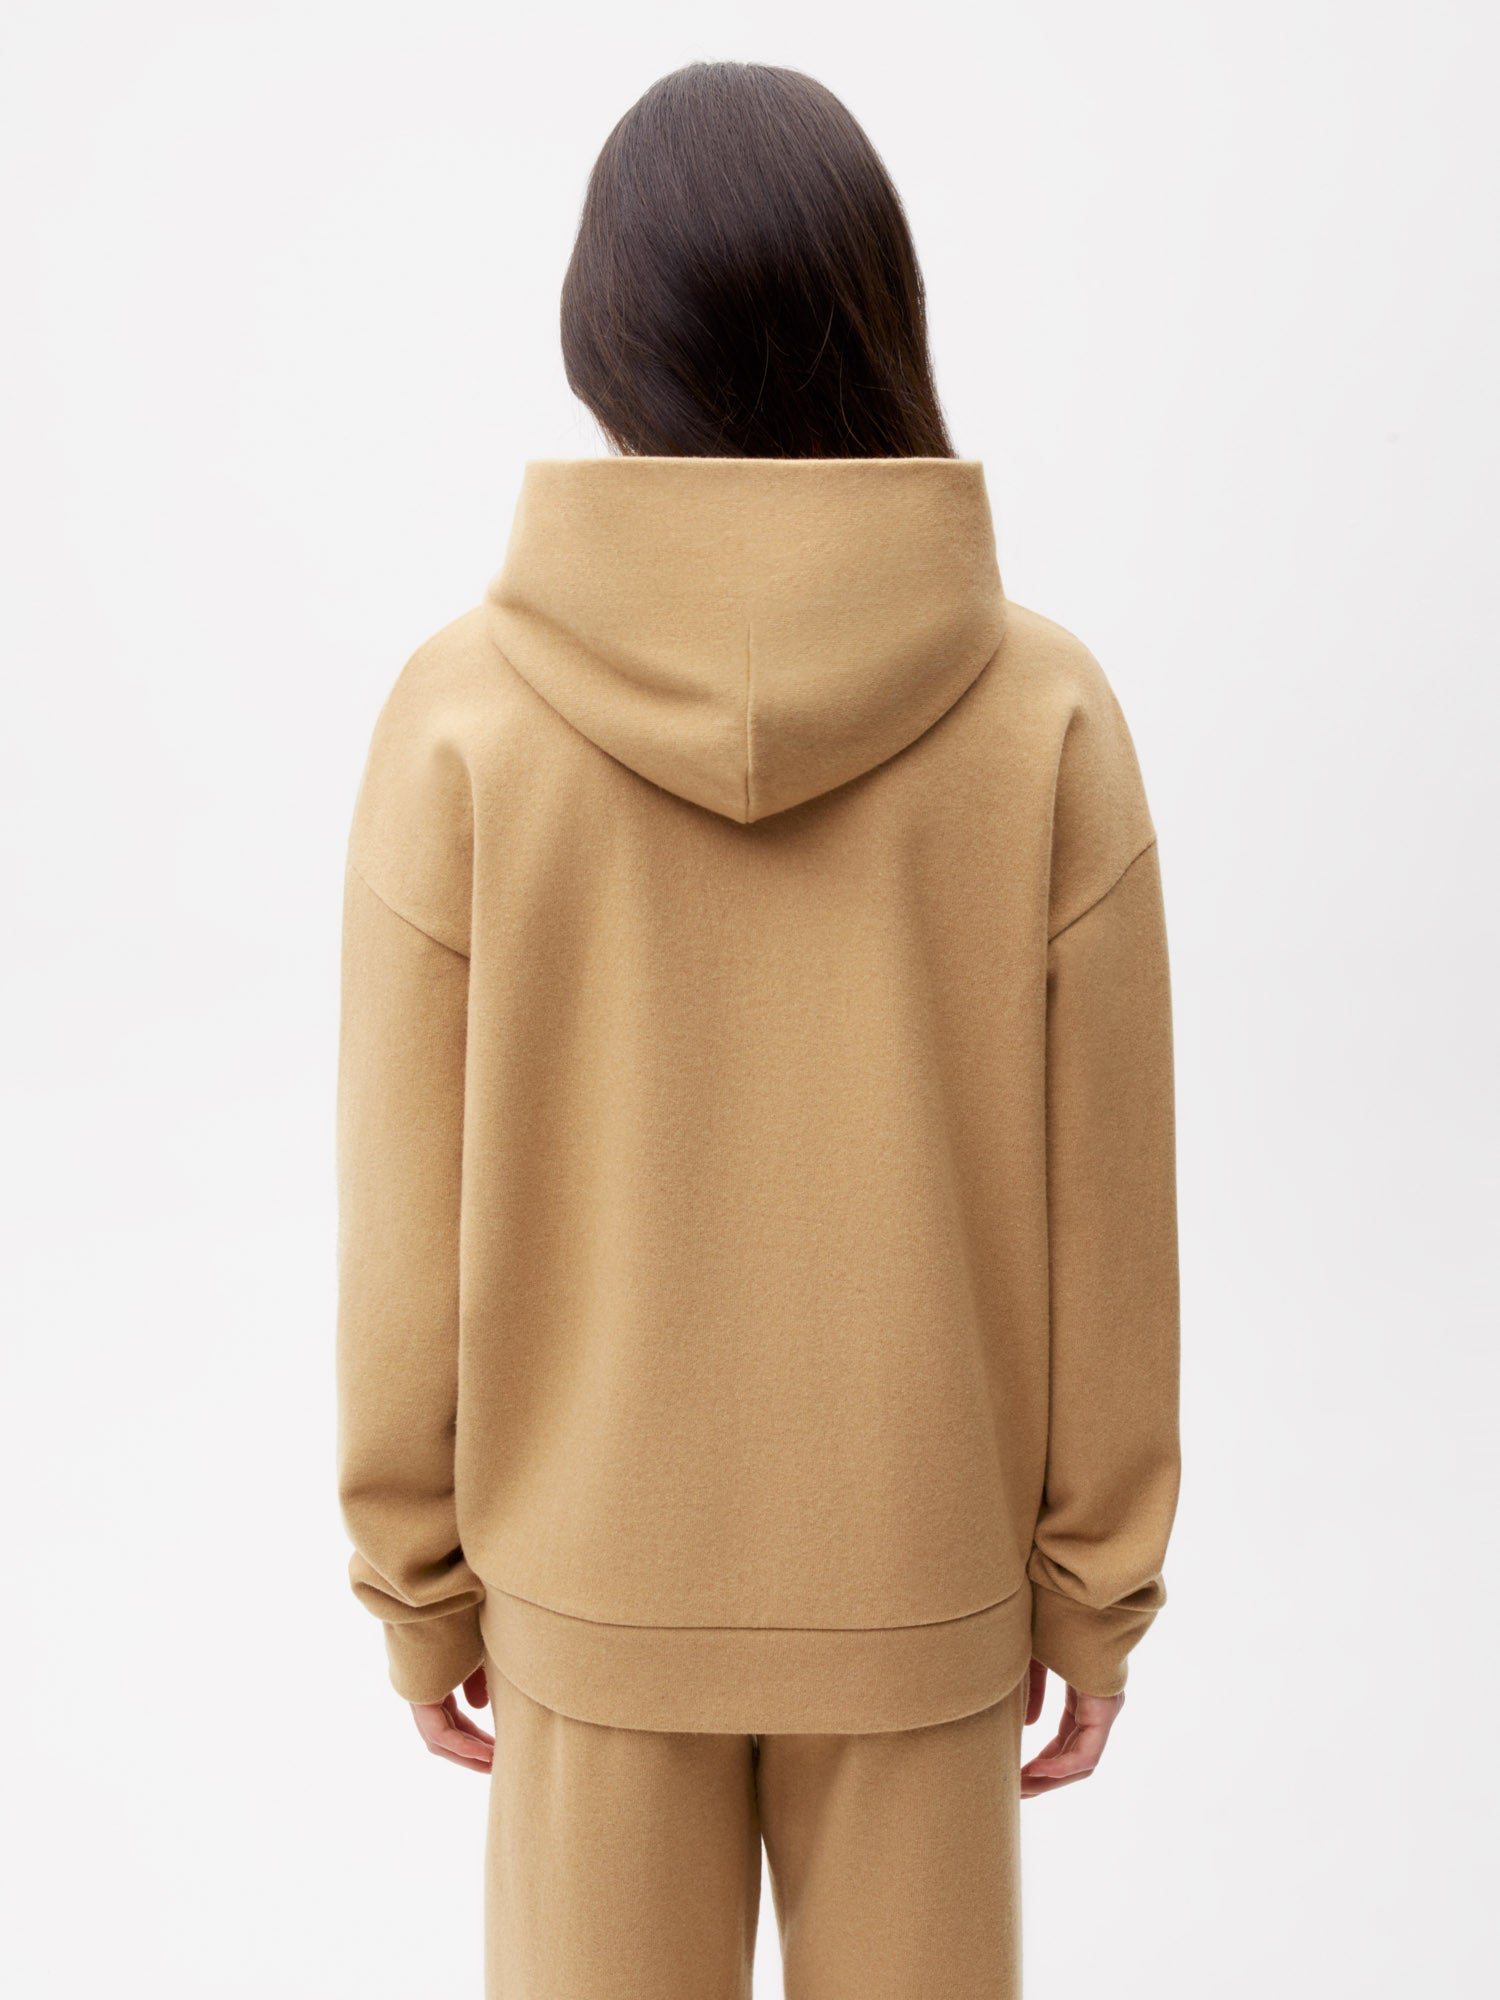    Recycled-Wool-Jersey-Hoodie-with-Pocket-Camel-Female-2